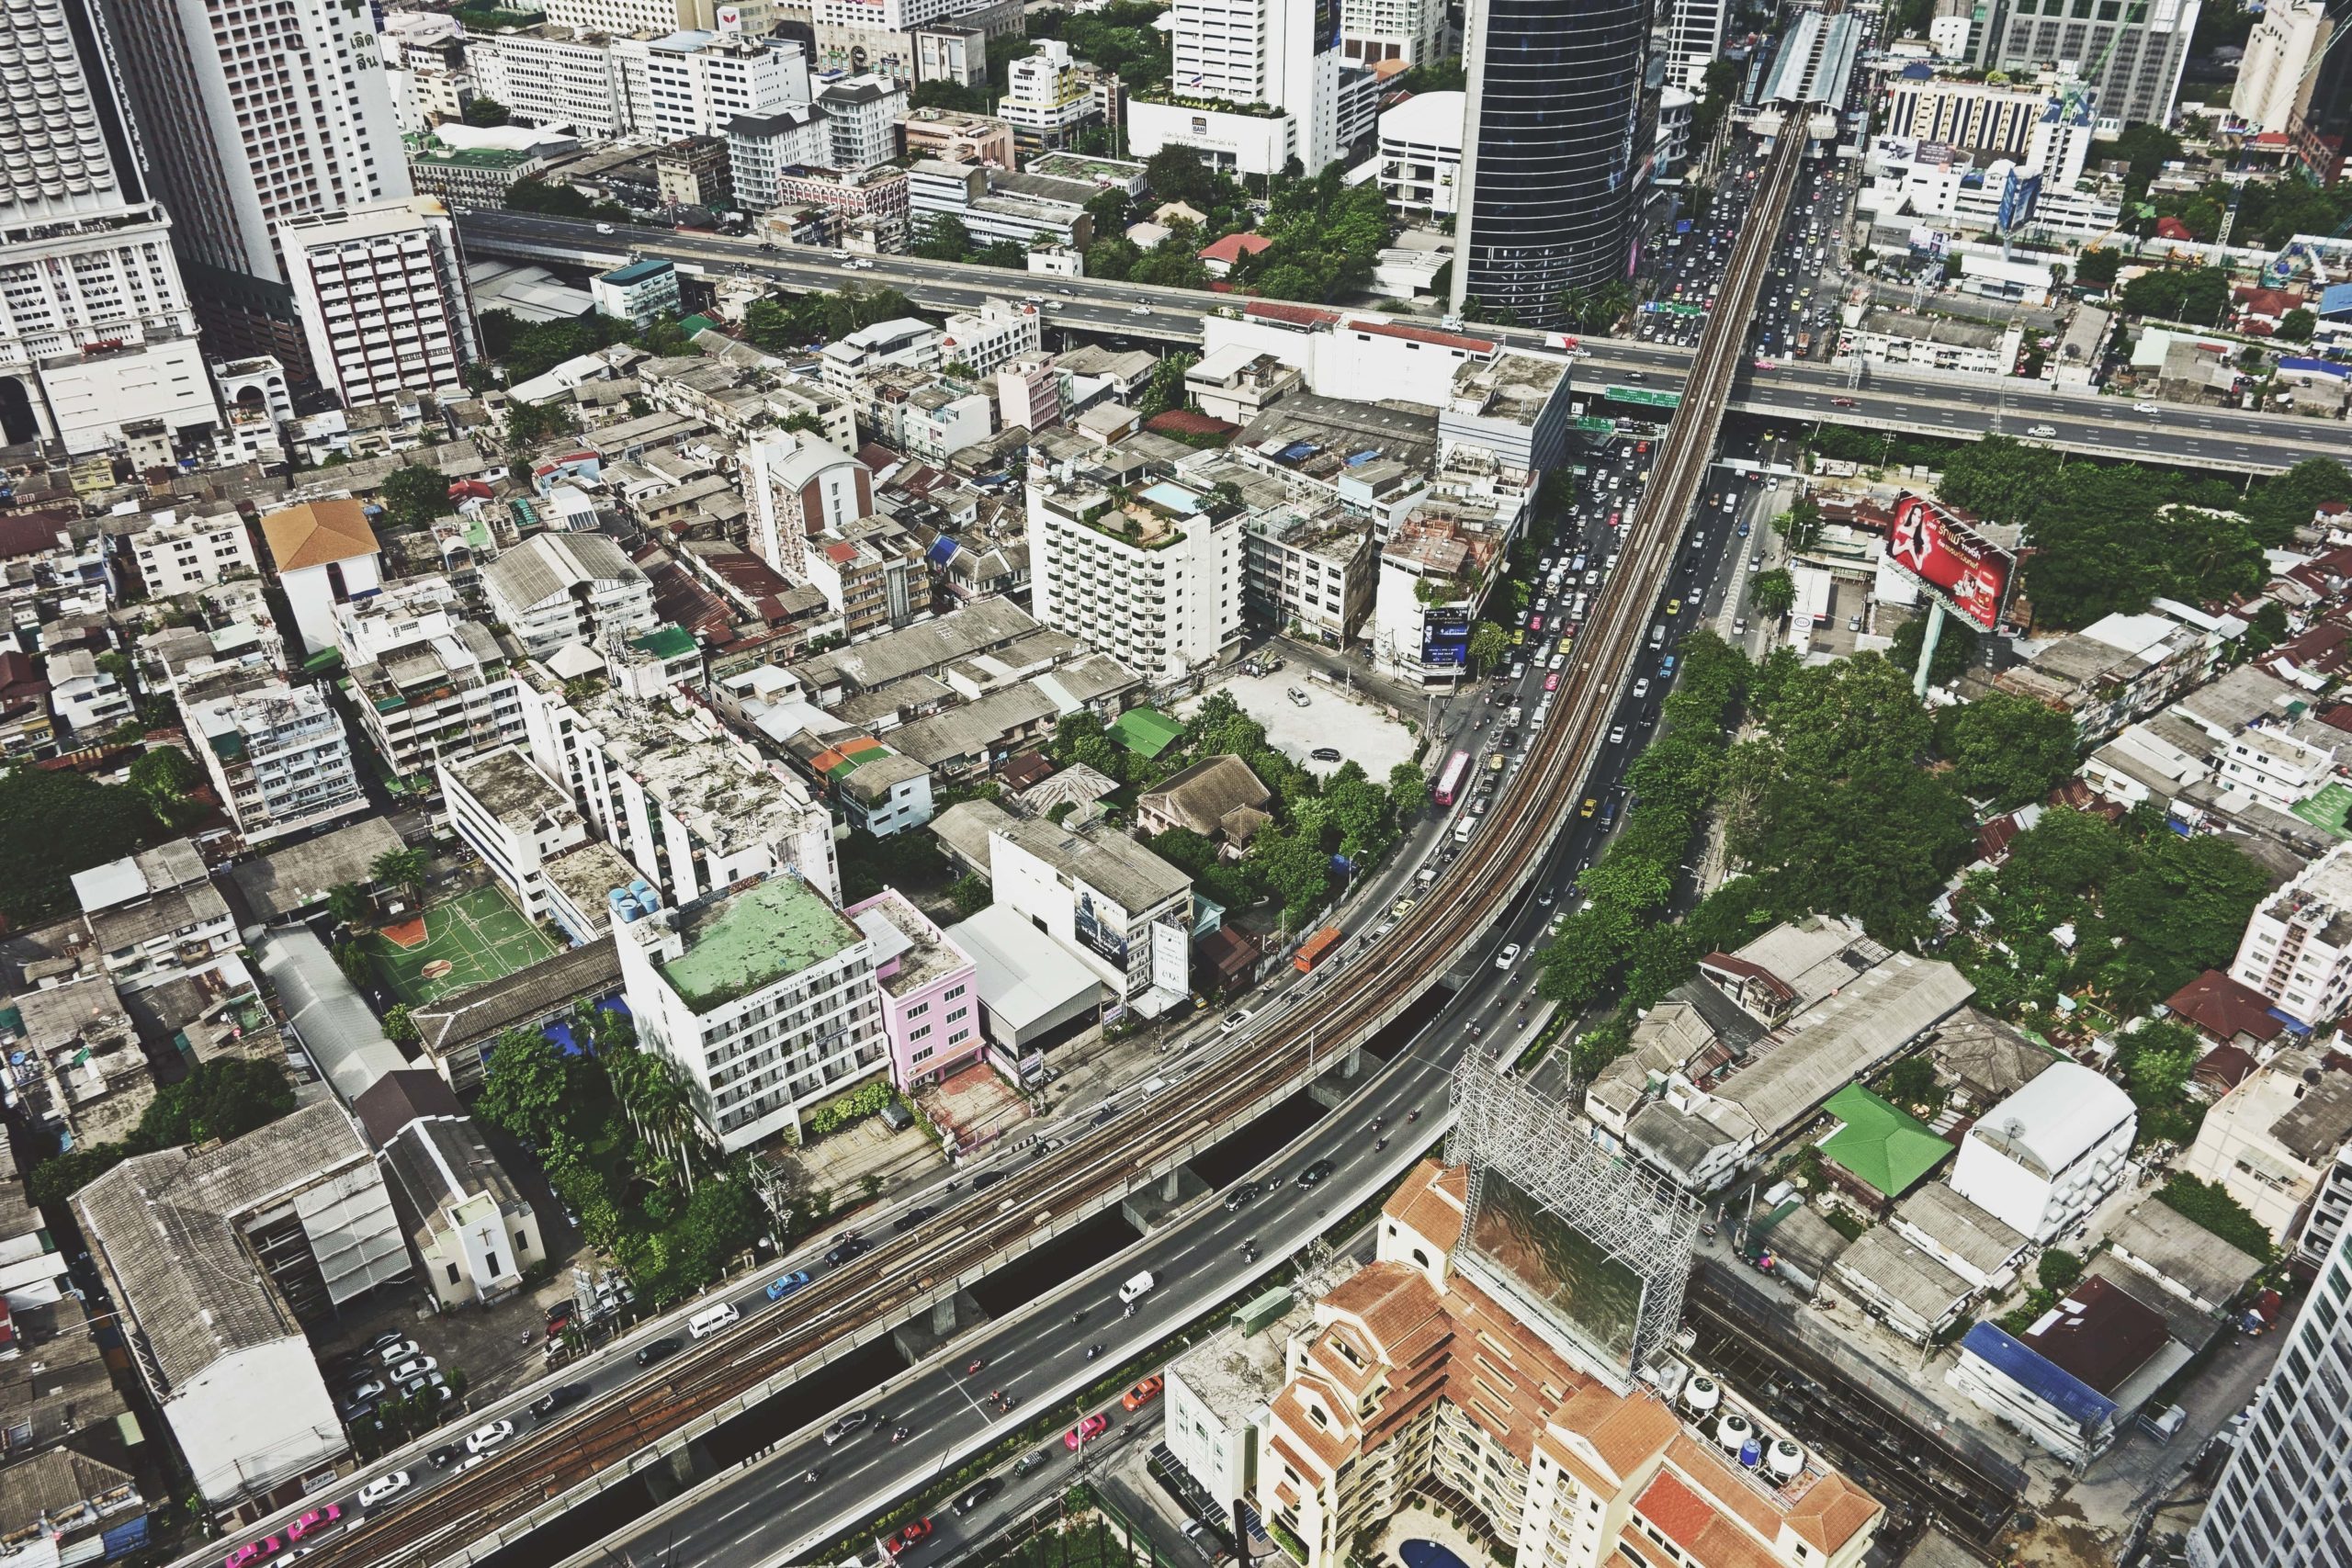 An aerial shot of people moving through a city.